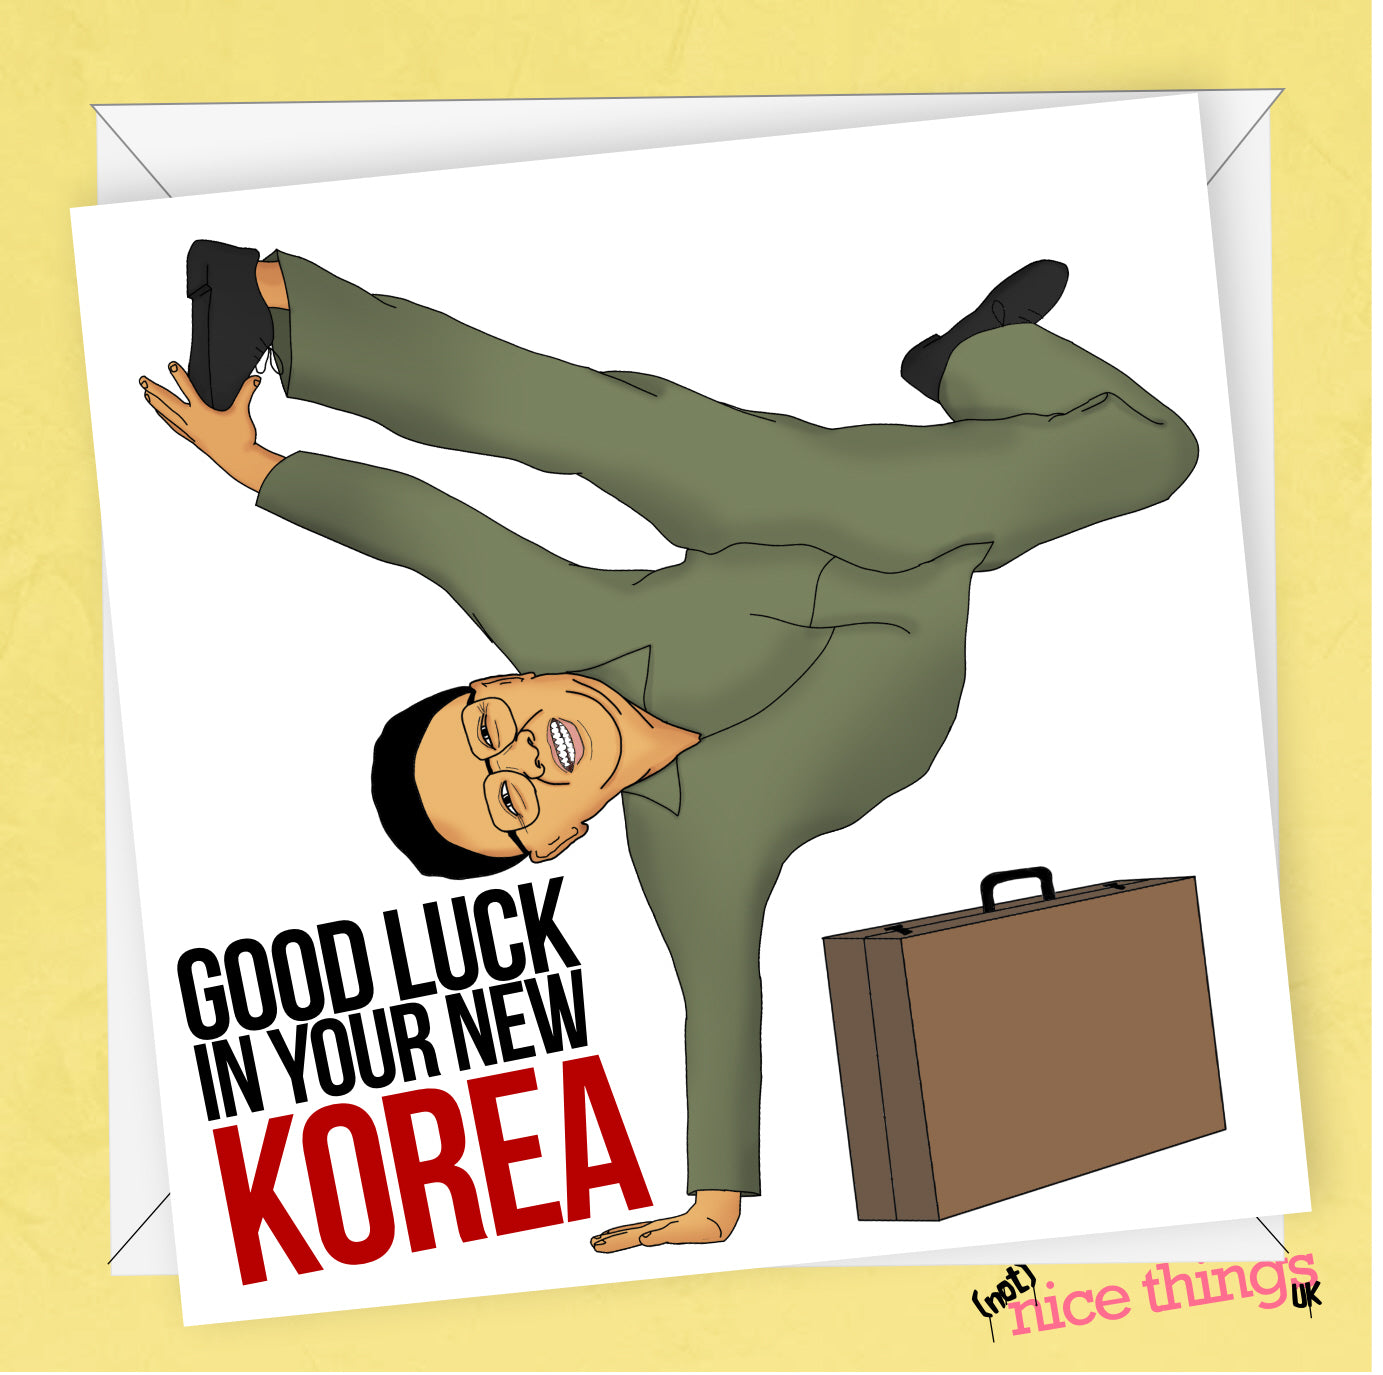 Funny Leaving Card, Good Luck Card, For Him, For Her, Work Colleague, Office Leaving, Goodbye, New Job, Congratulations, New Korea